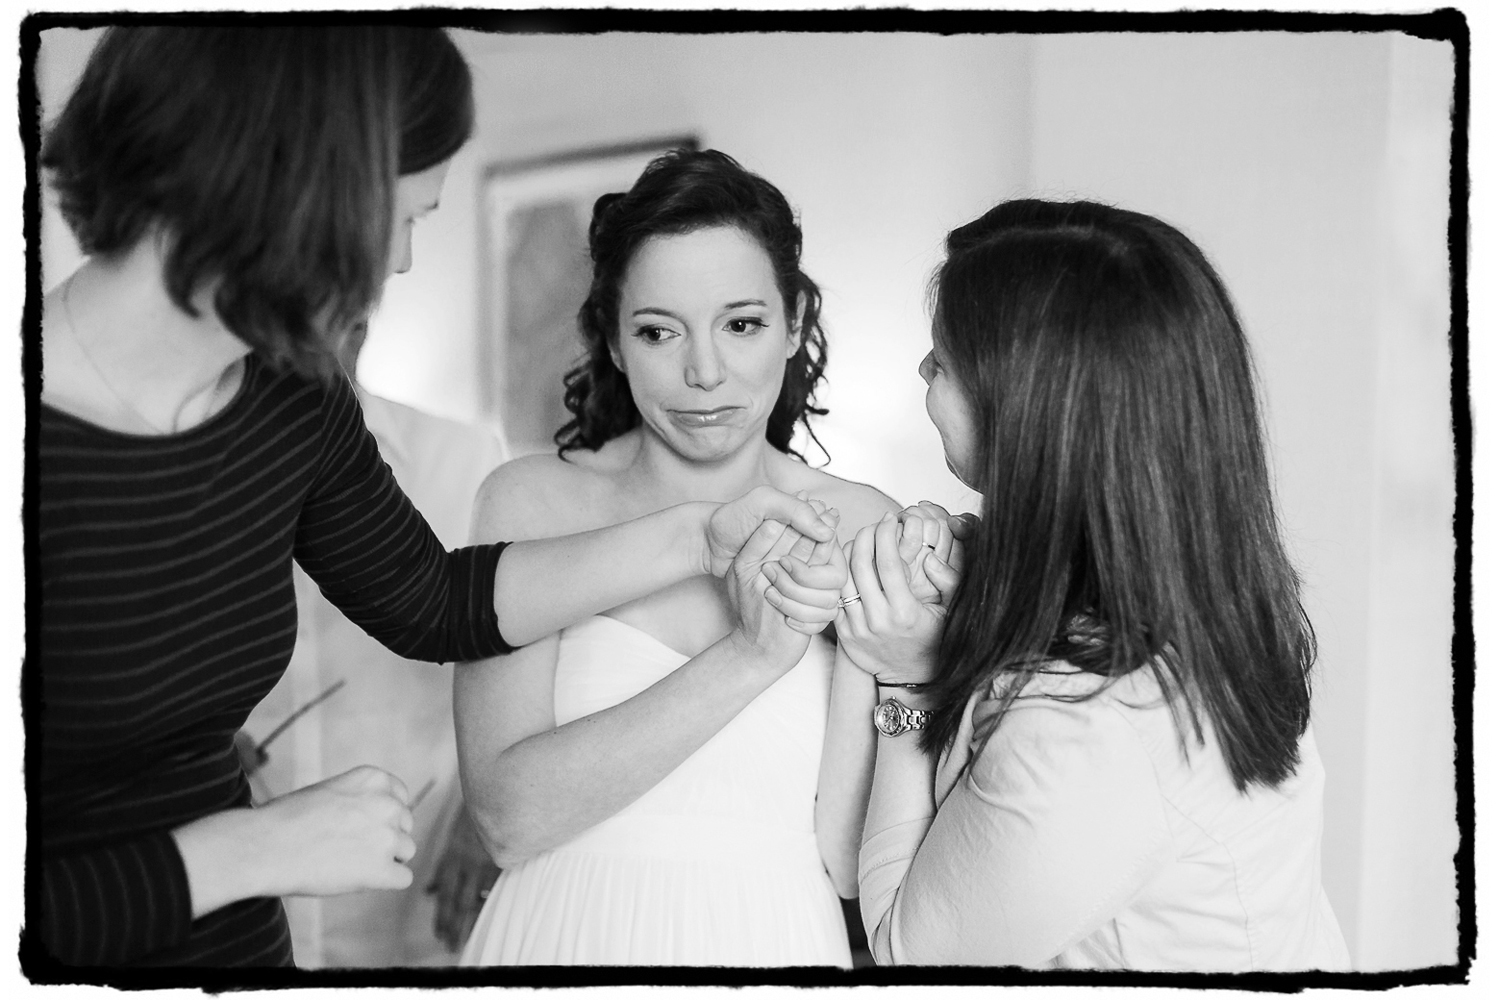 Julie shares an emotional moment with her bridesmaids as it hits her that this is really the day of her wedding at Battery Gardens.